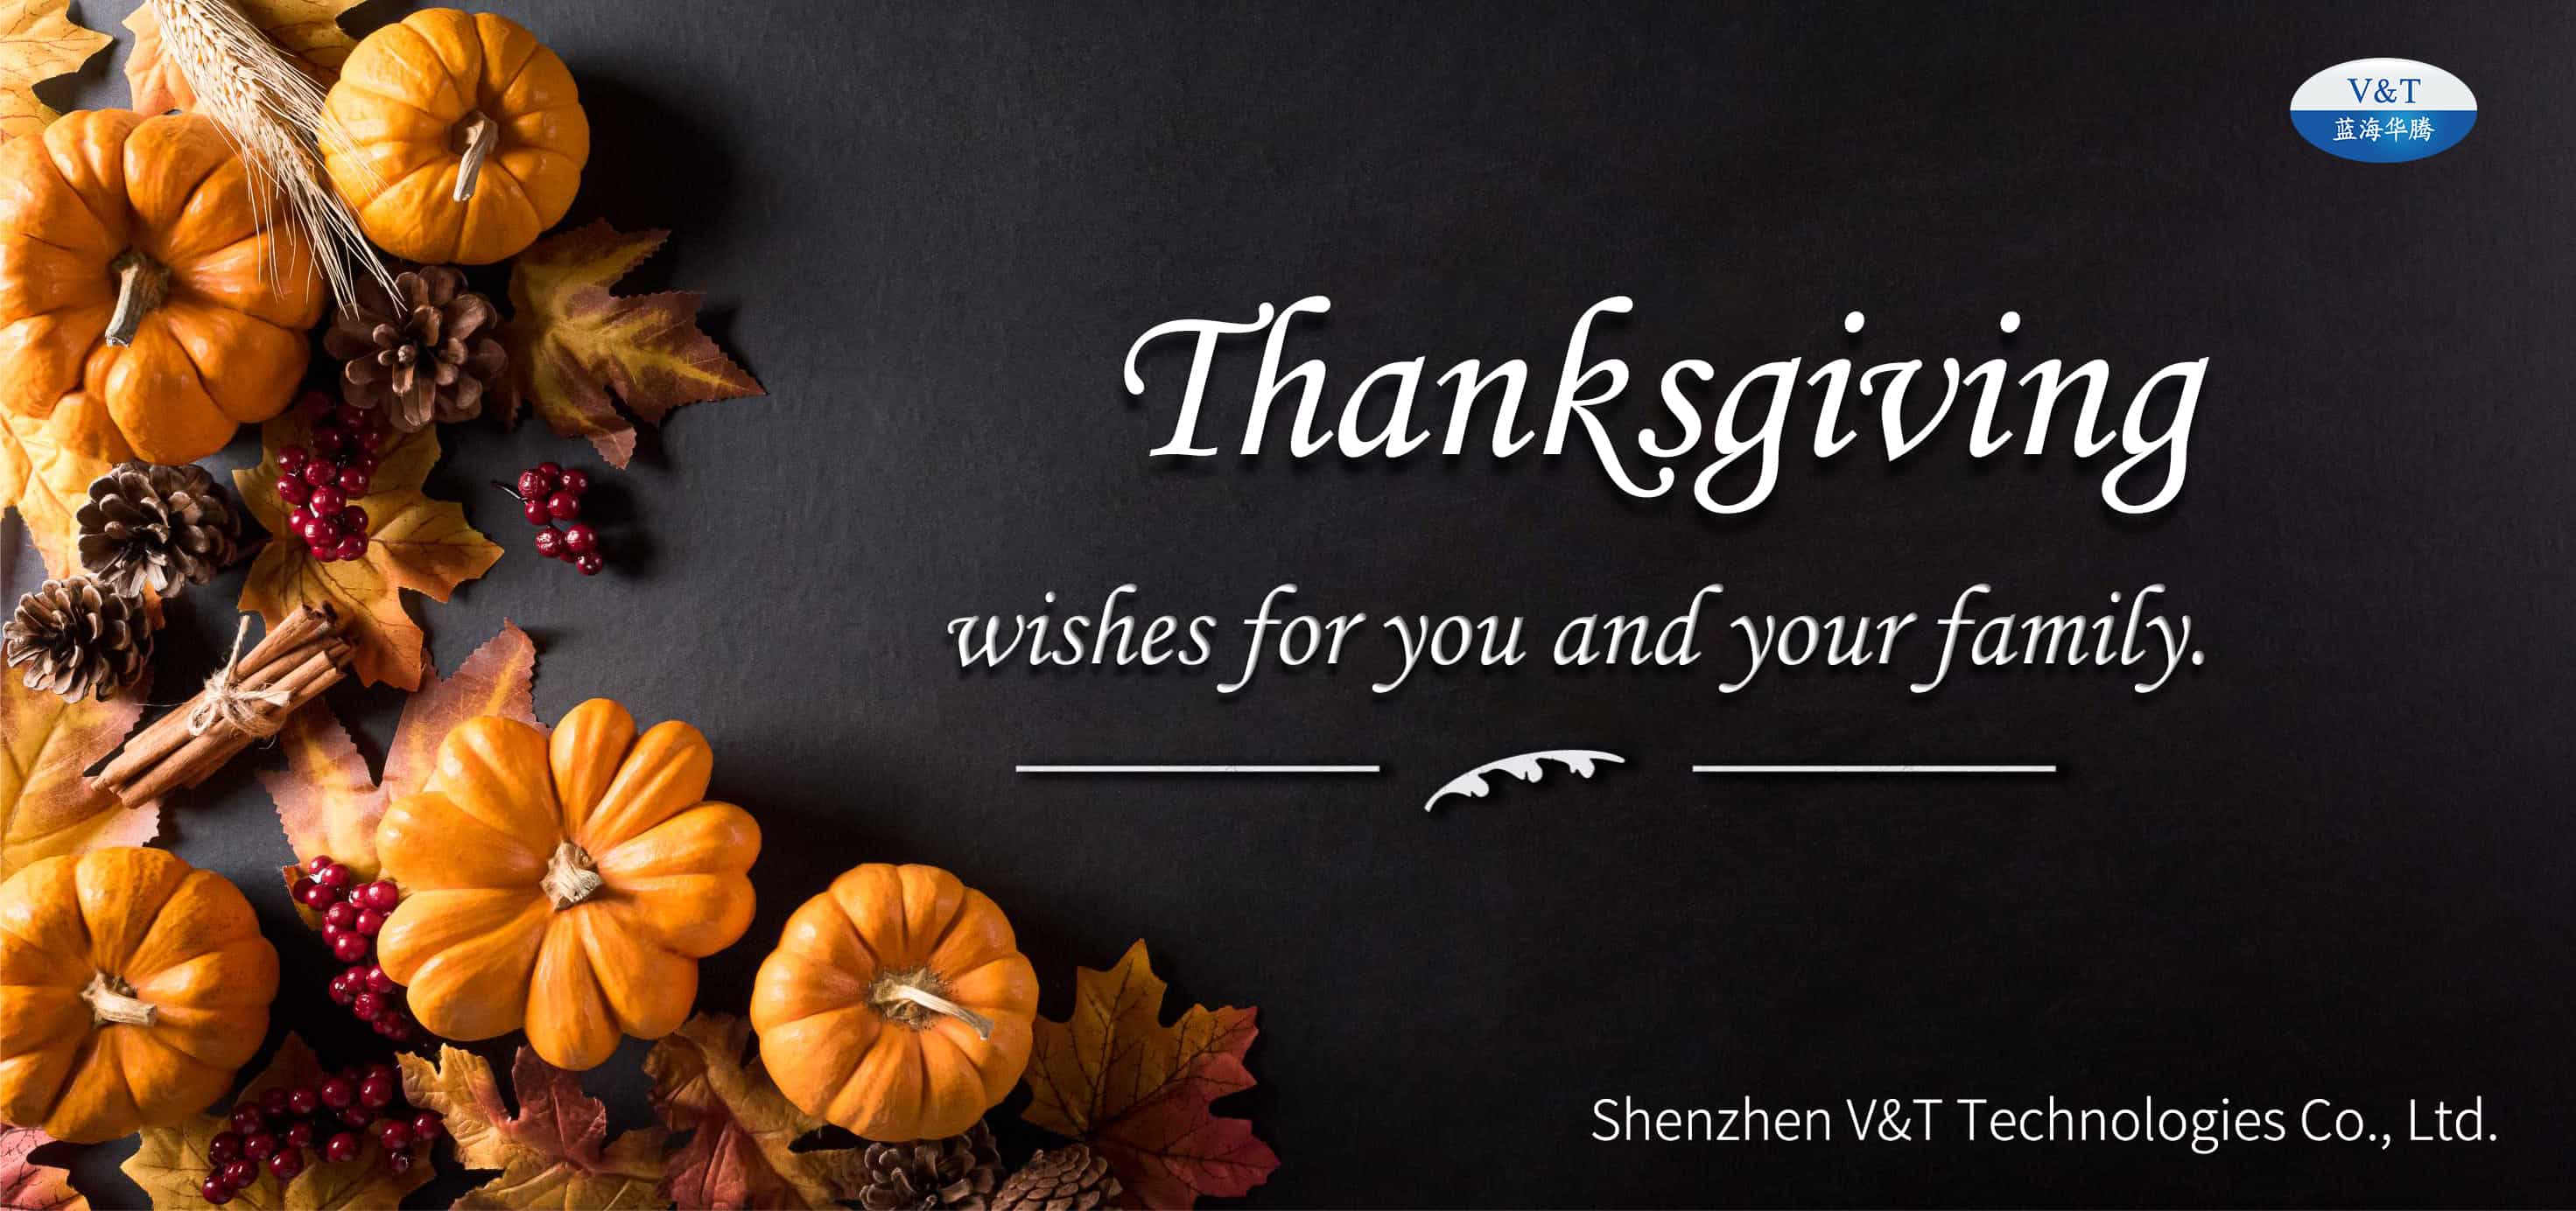 Thanksgiving Day wishes for you and your family. 